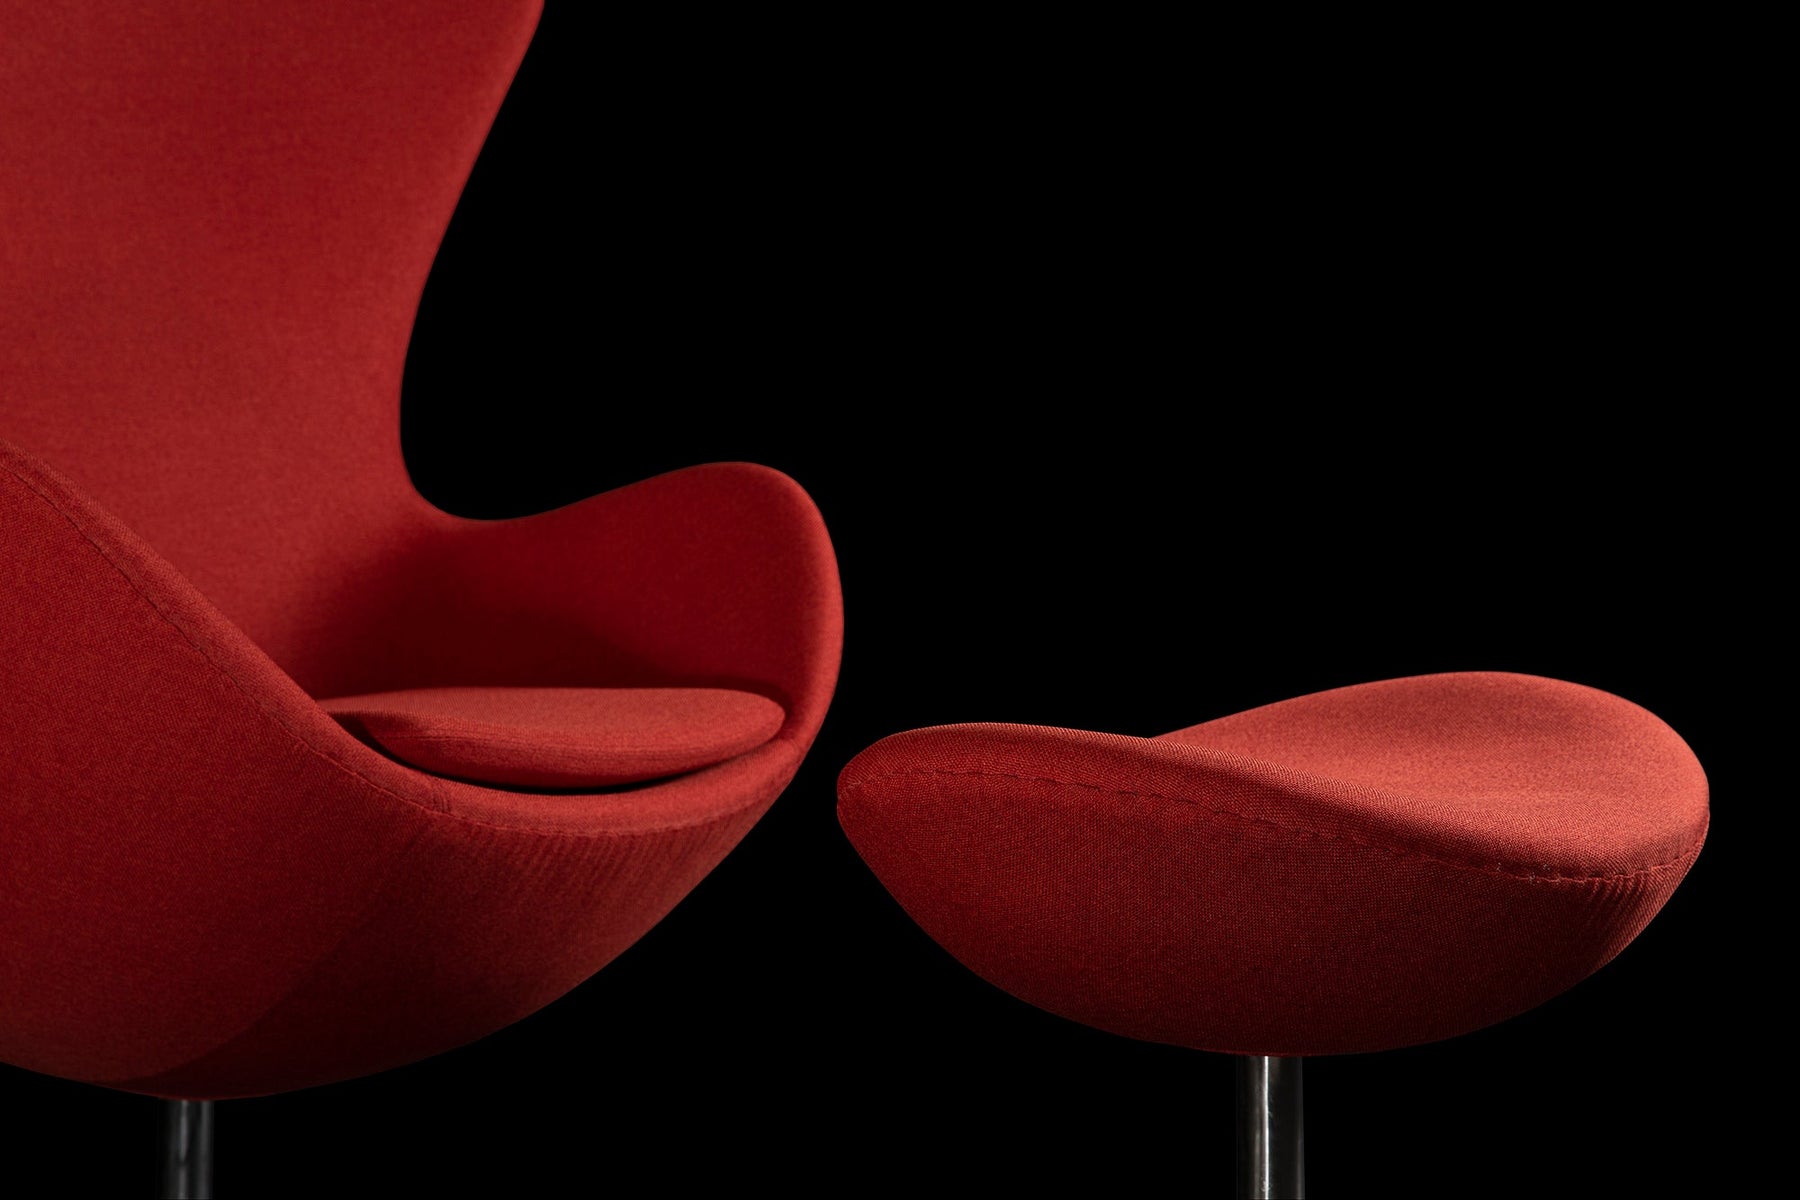 The Tuscan Red fabric jumps away from the jet black background on this photographic banner featuring the infamous Arne Jacobsen Egg Chair & Ottoman set